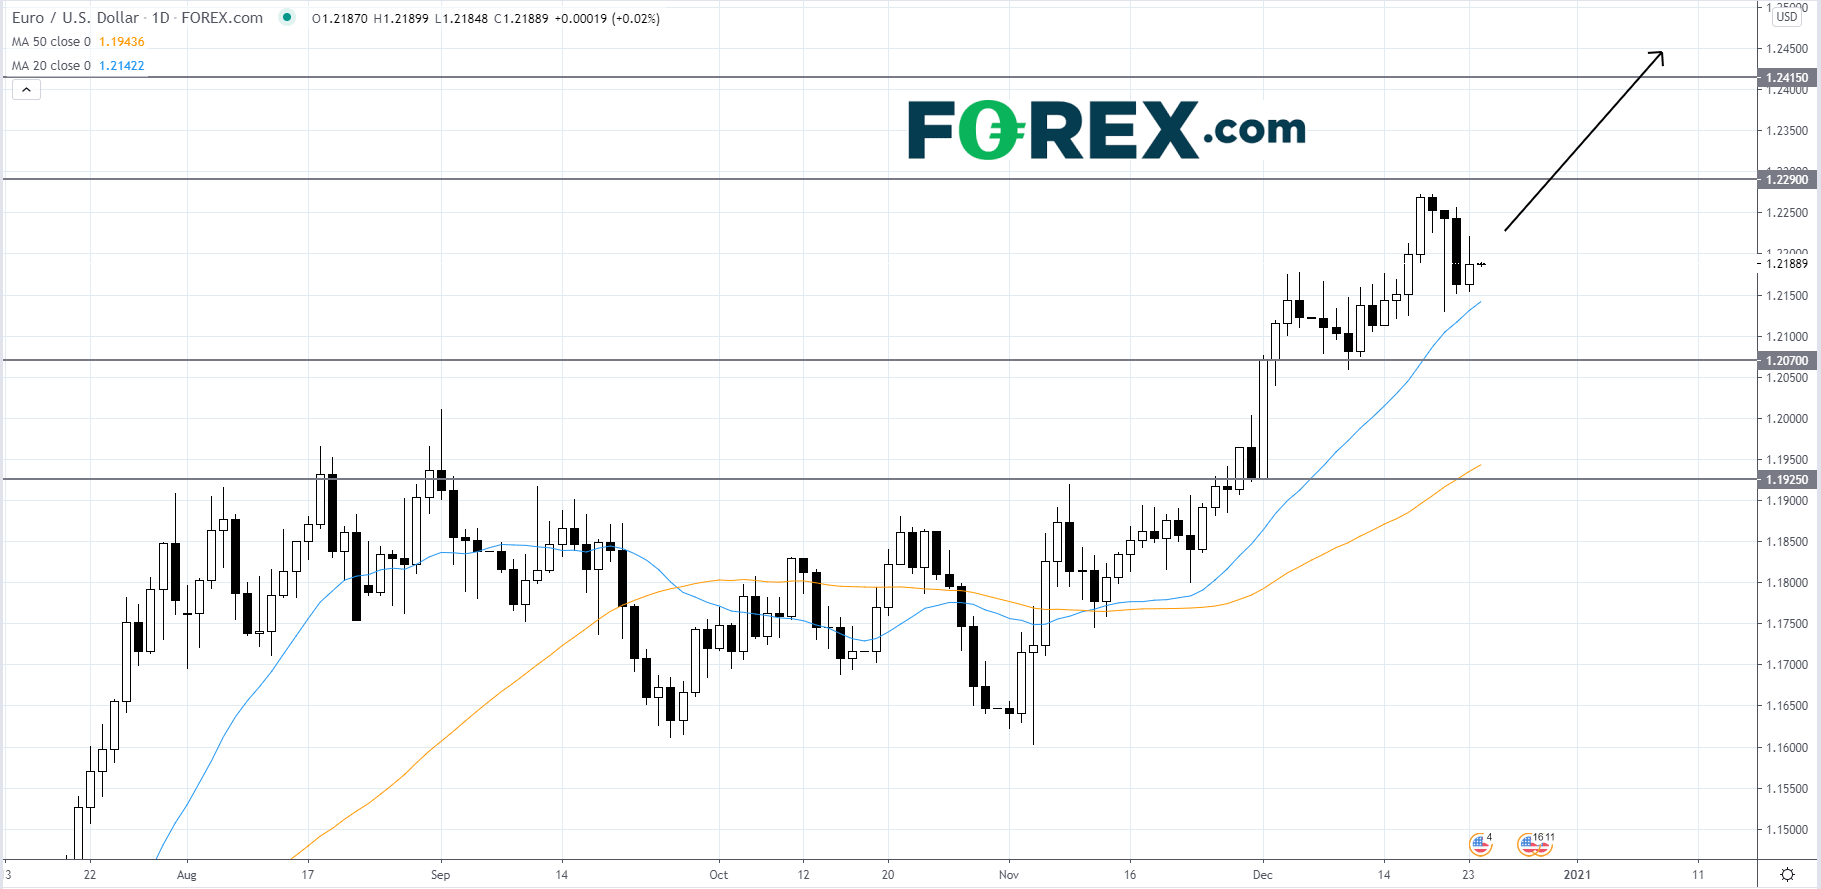 Market chart of The EUR/USD Appears To Be Advancing In A Strong Short-term Uptrend. Published in December 2020 by FOREX.com